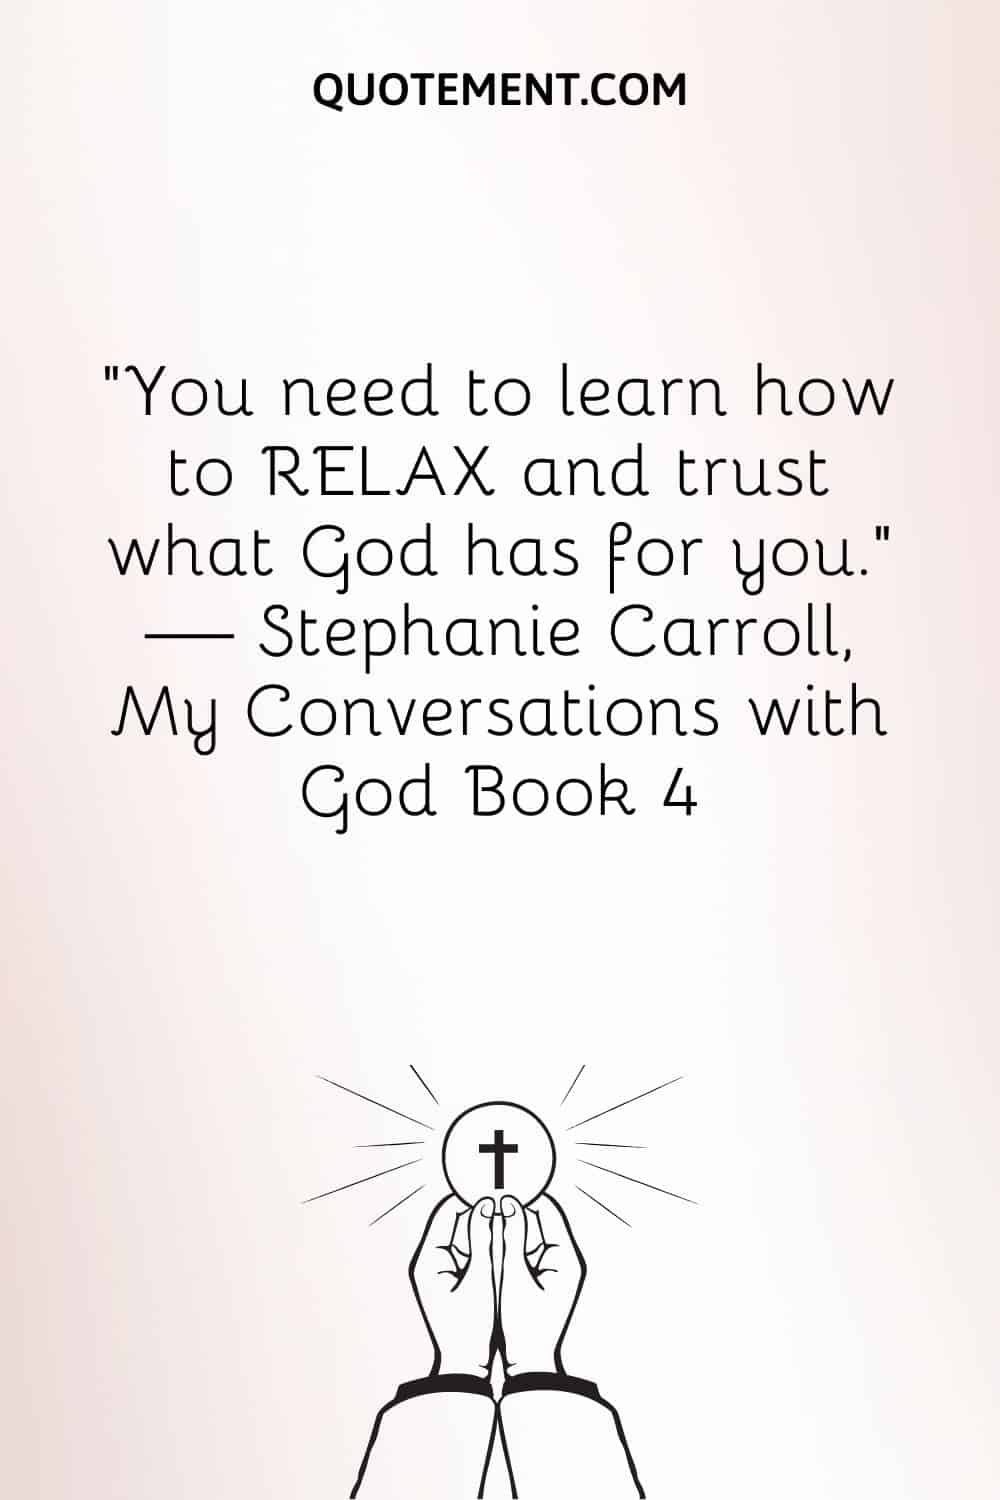 You need to learn how to RELAX and trust what God has for you